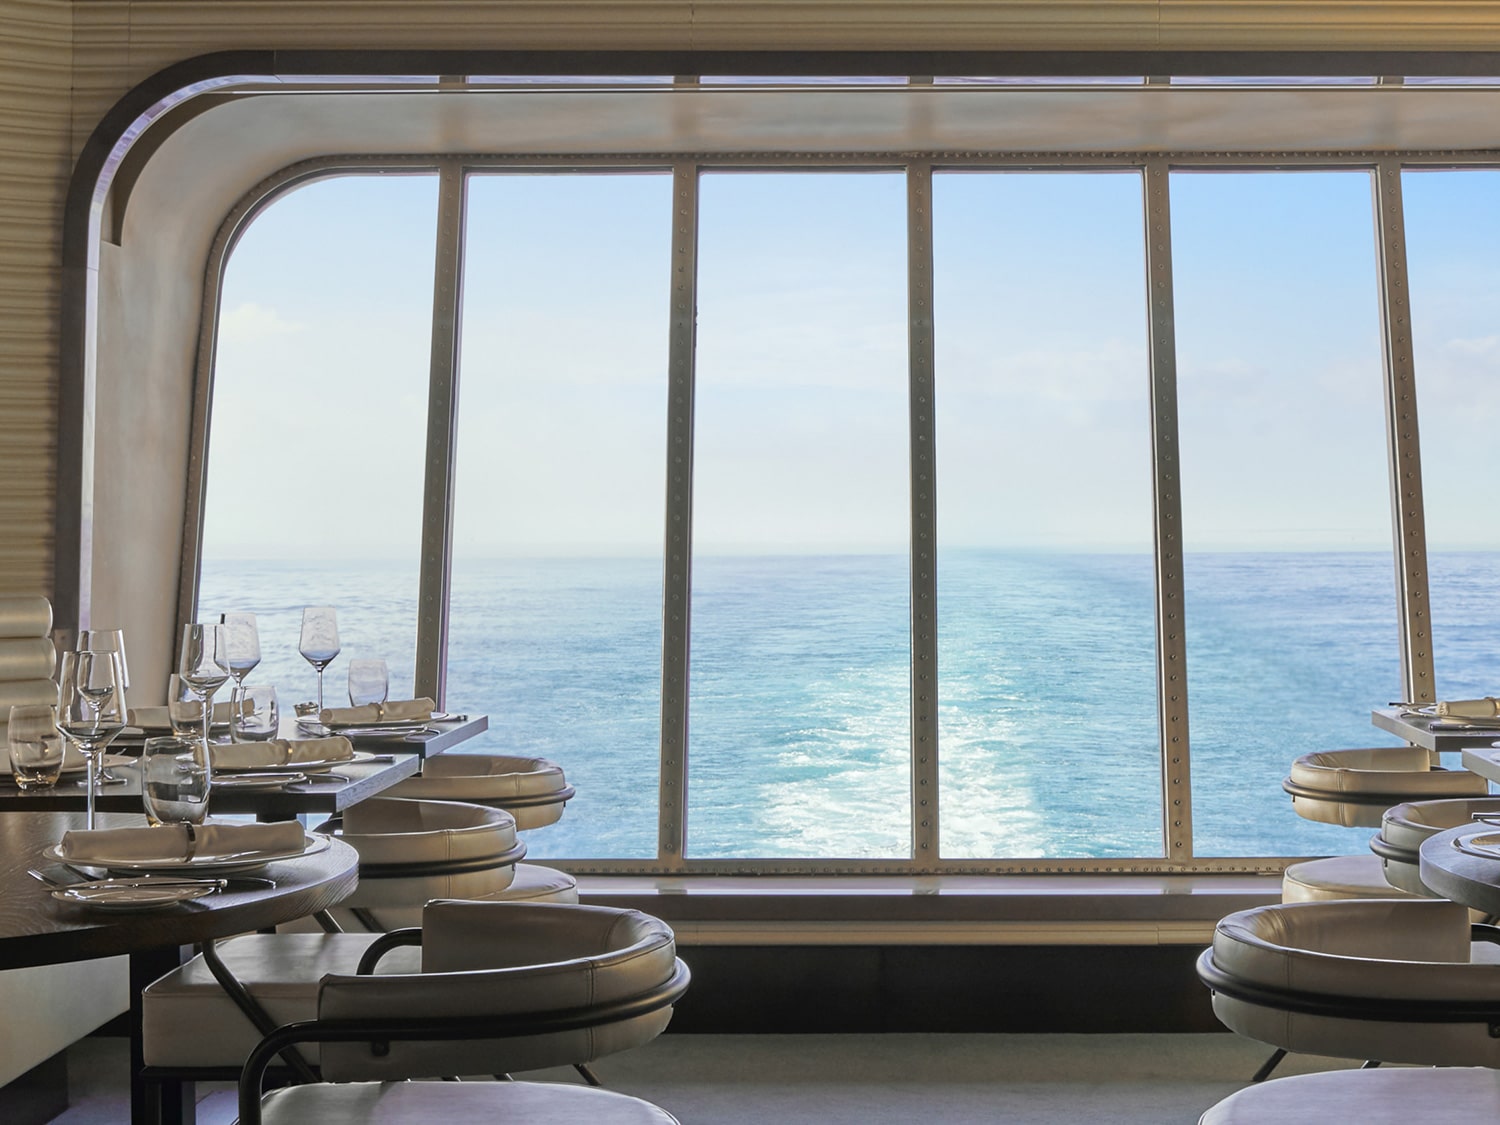 The view from the Virgin Voyages Valiant Lady dining experience, The Wake.